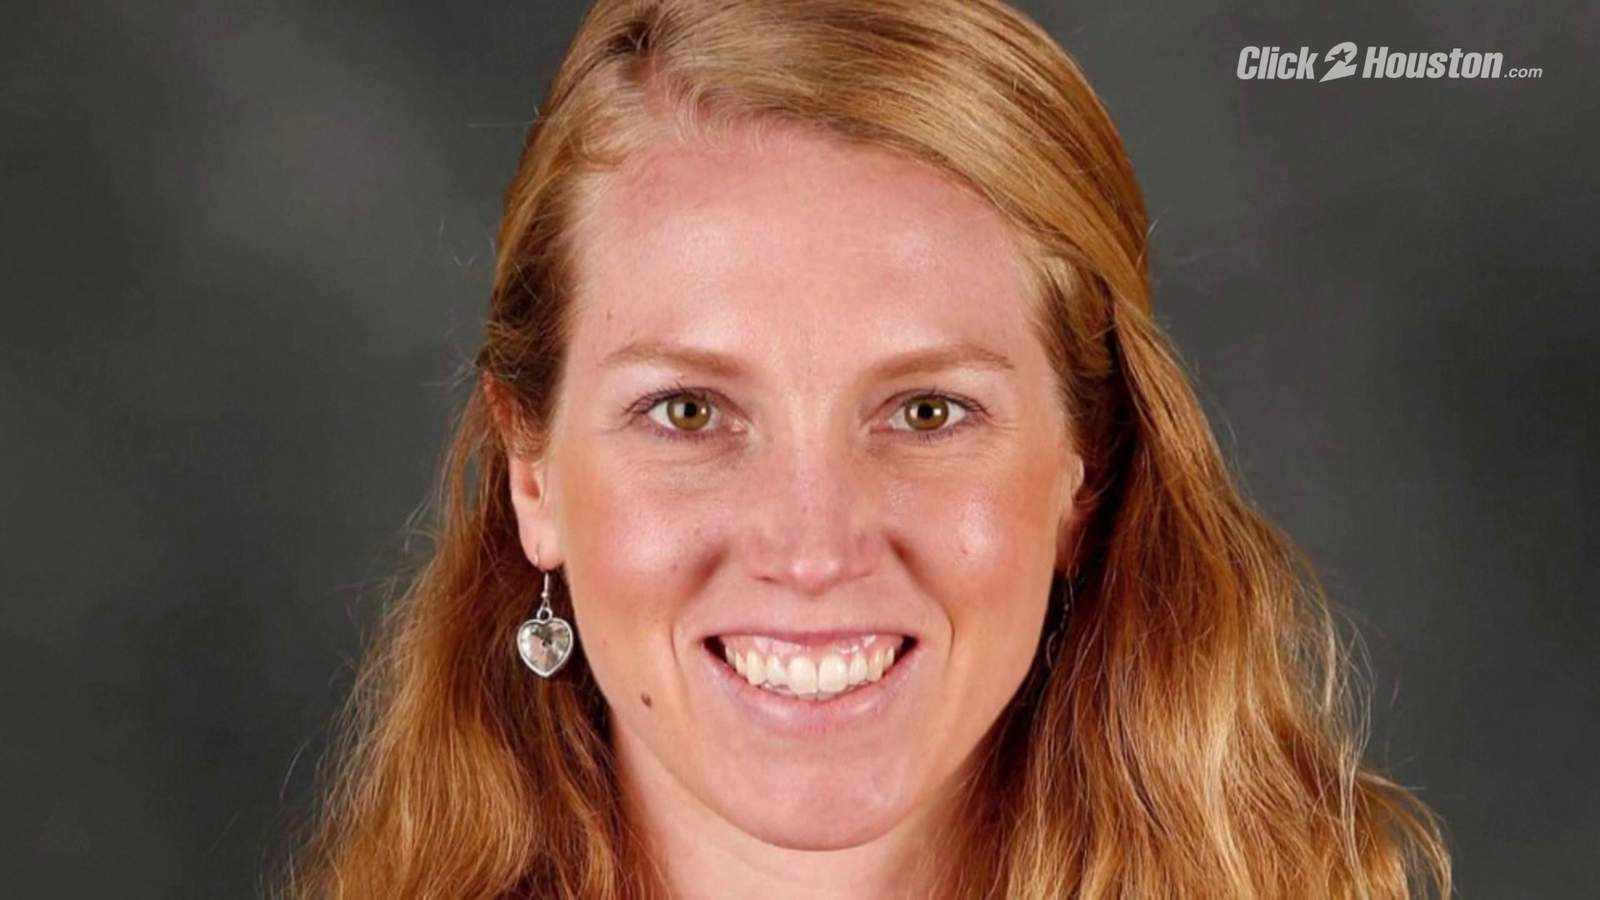 San Francisco Giants Alyssa Nakken makes history as first woman to coach in on-field capacity